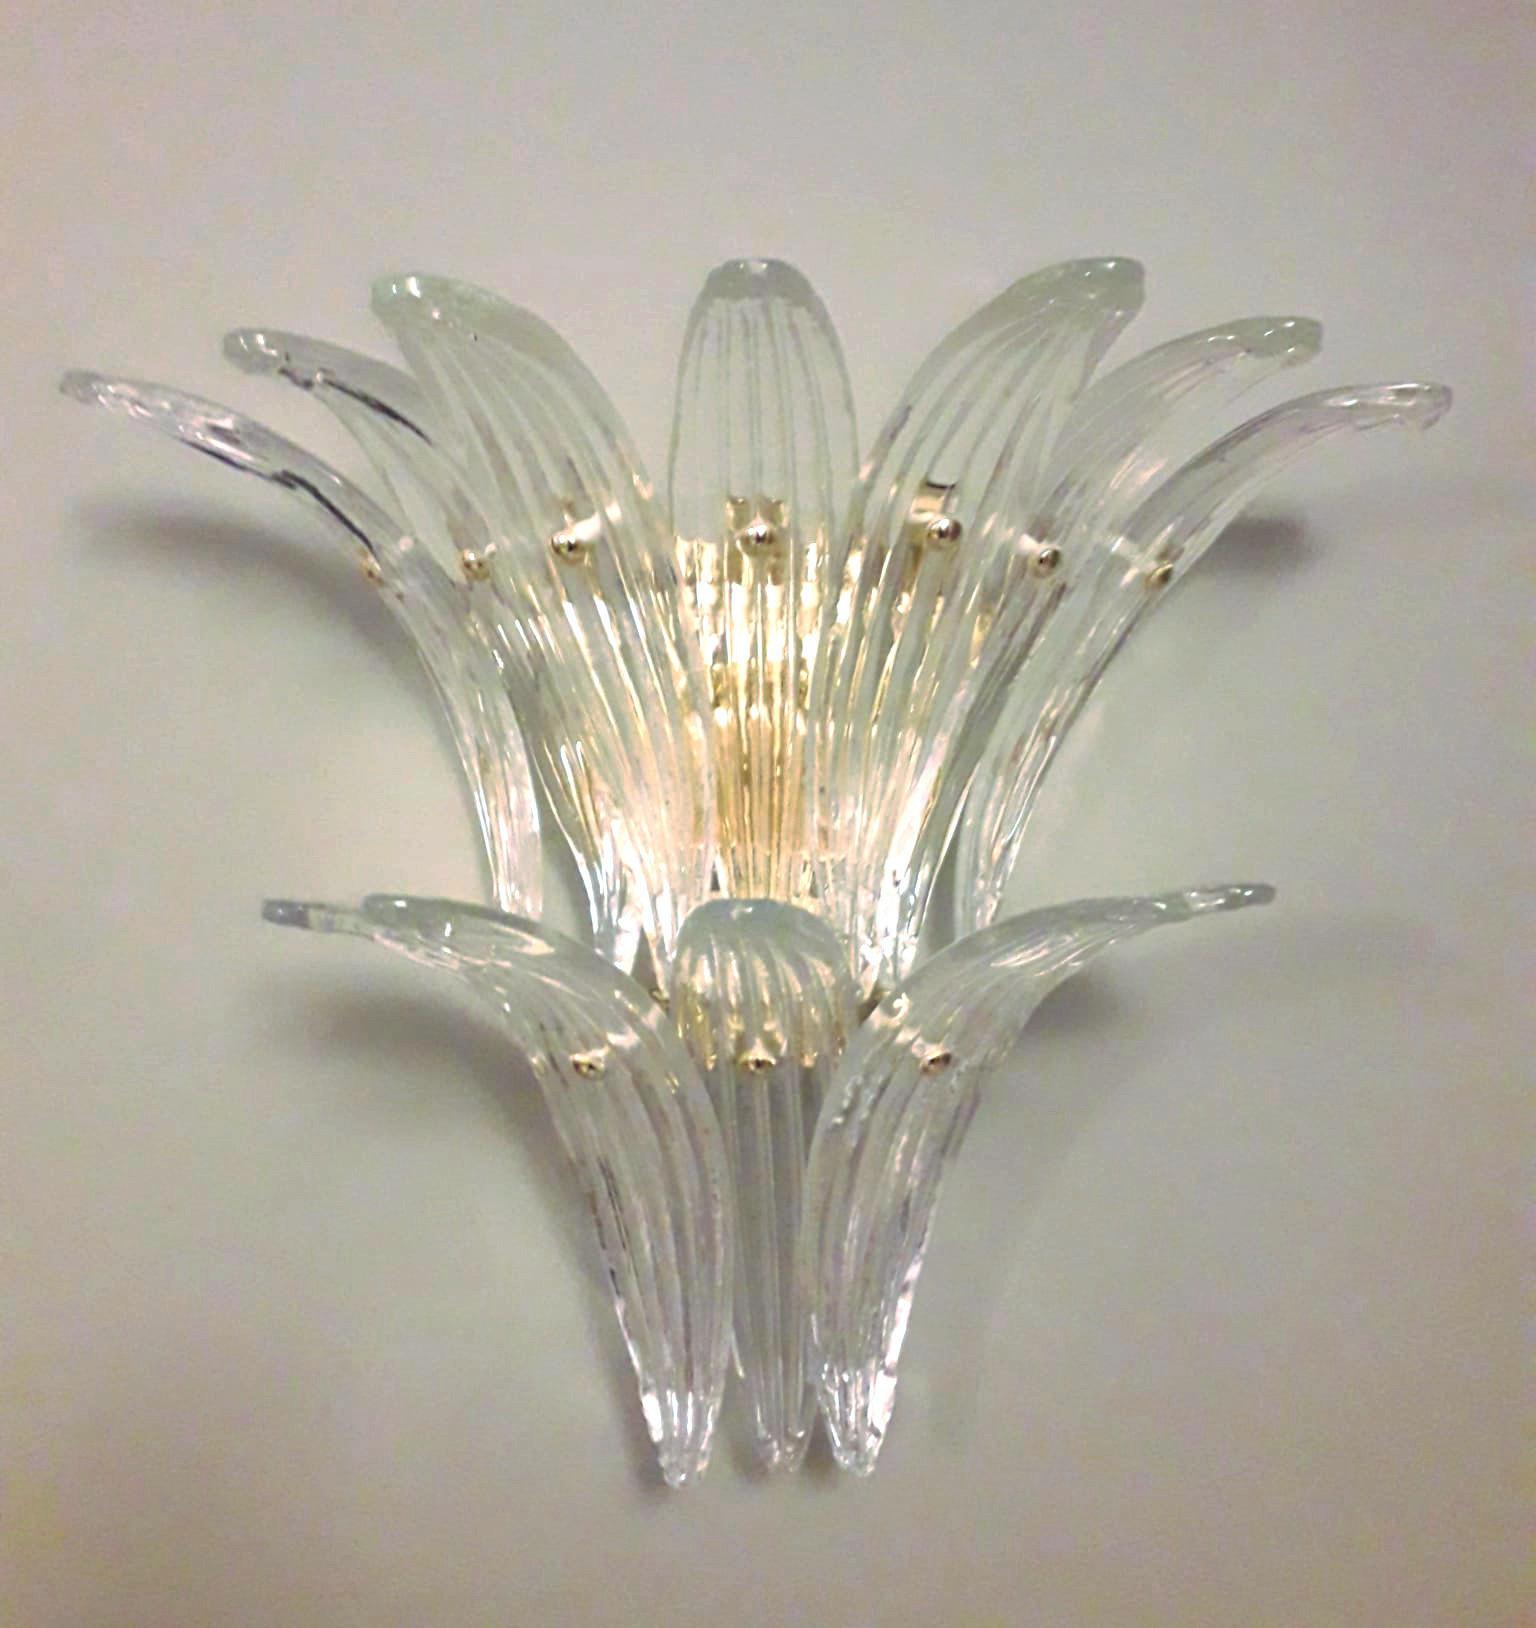 Italian wall light with vintage clear Murano palmette glass leaves mounted on newly made gold finish metal frames / Made in Italy.
Measures: height 16 inches, width 18 inches, depth 9 inches.
2 Lights / E12 or E14 type / max 40W each
1 pair